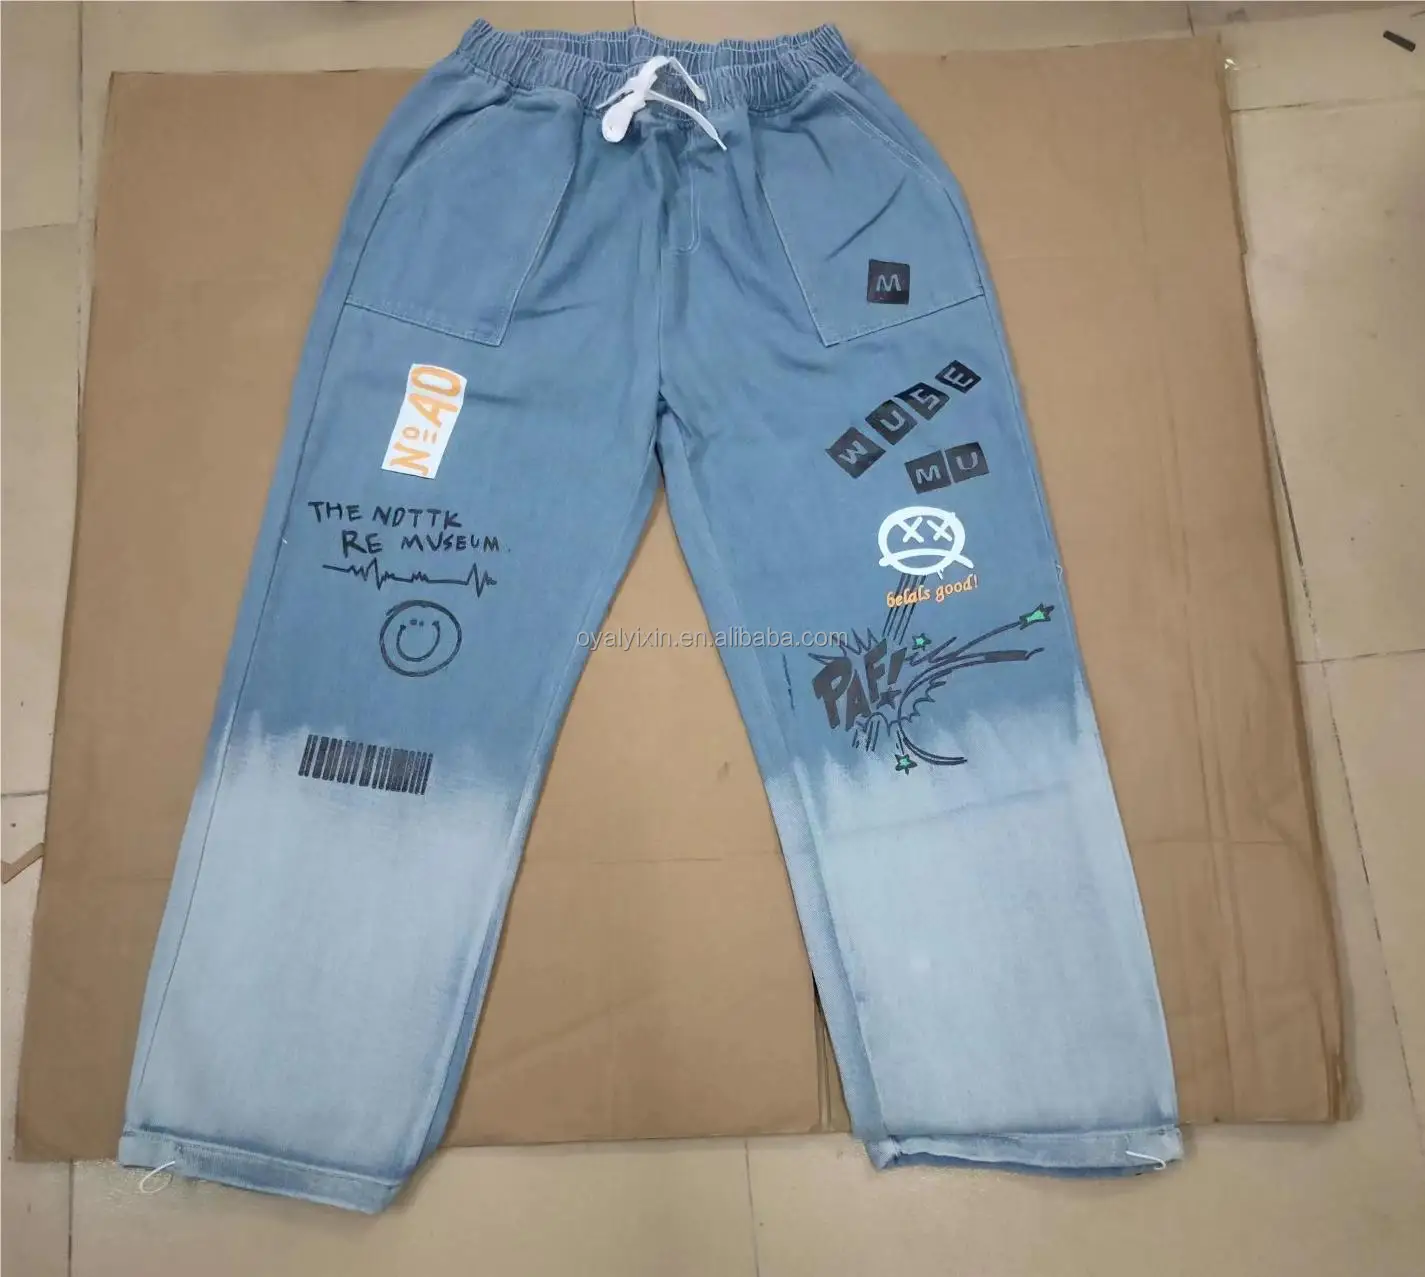 Vintage Demented Skinny Blue Denim Men Stacked Jeans For Men Wholesale Best  Version With Knee Hole, Slim Fit, Distressed Fabric, Knife Cut And Ripped  Details From Jingju, $42.54 | DHgate.Com